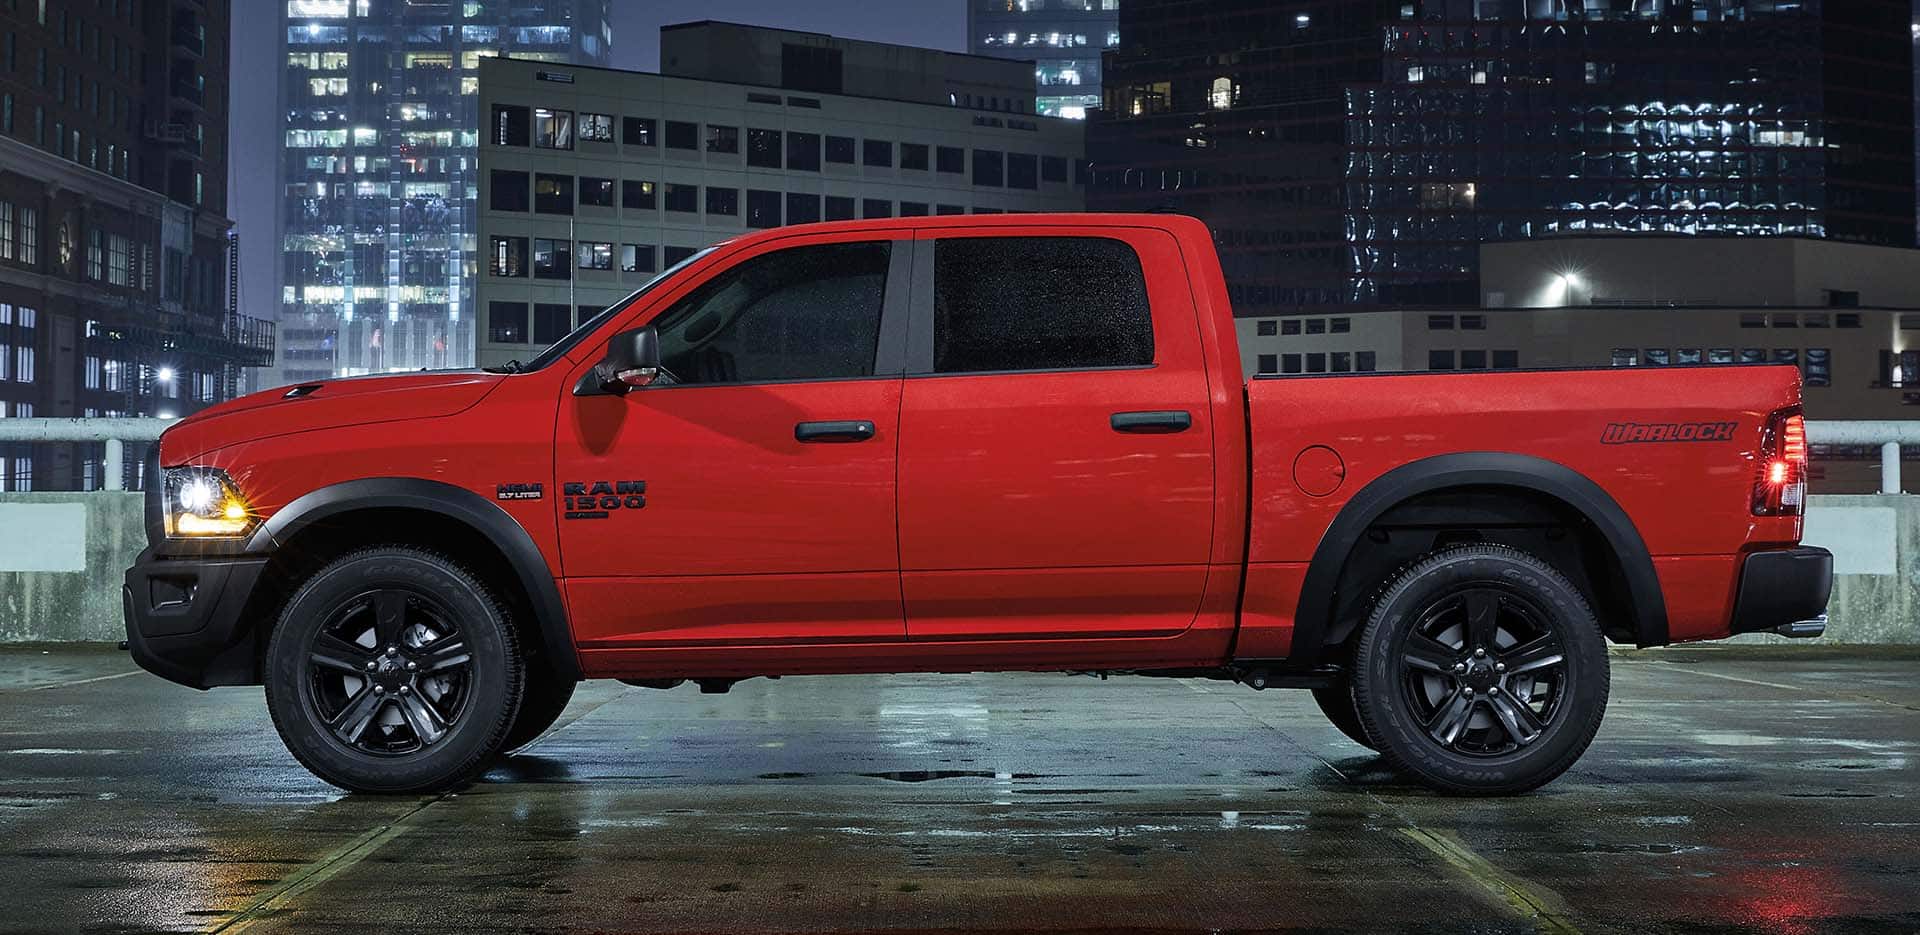 Display A profile of a red 2023 Ram 1500 Classic Warlock Crew Cab parked on a rooftop garage at night with high-rise buildings in the background.